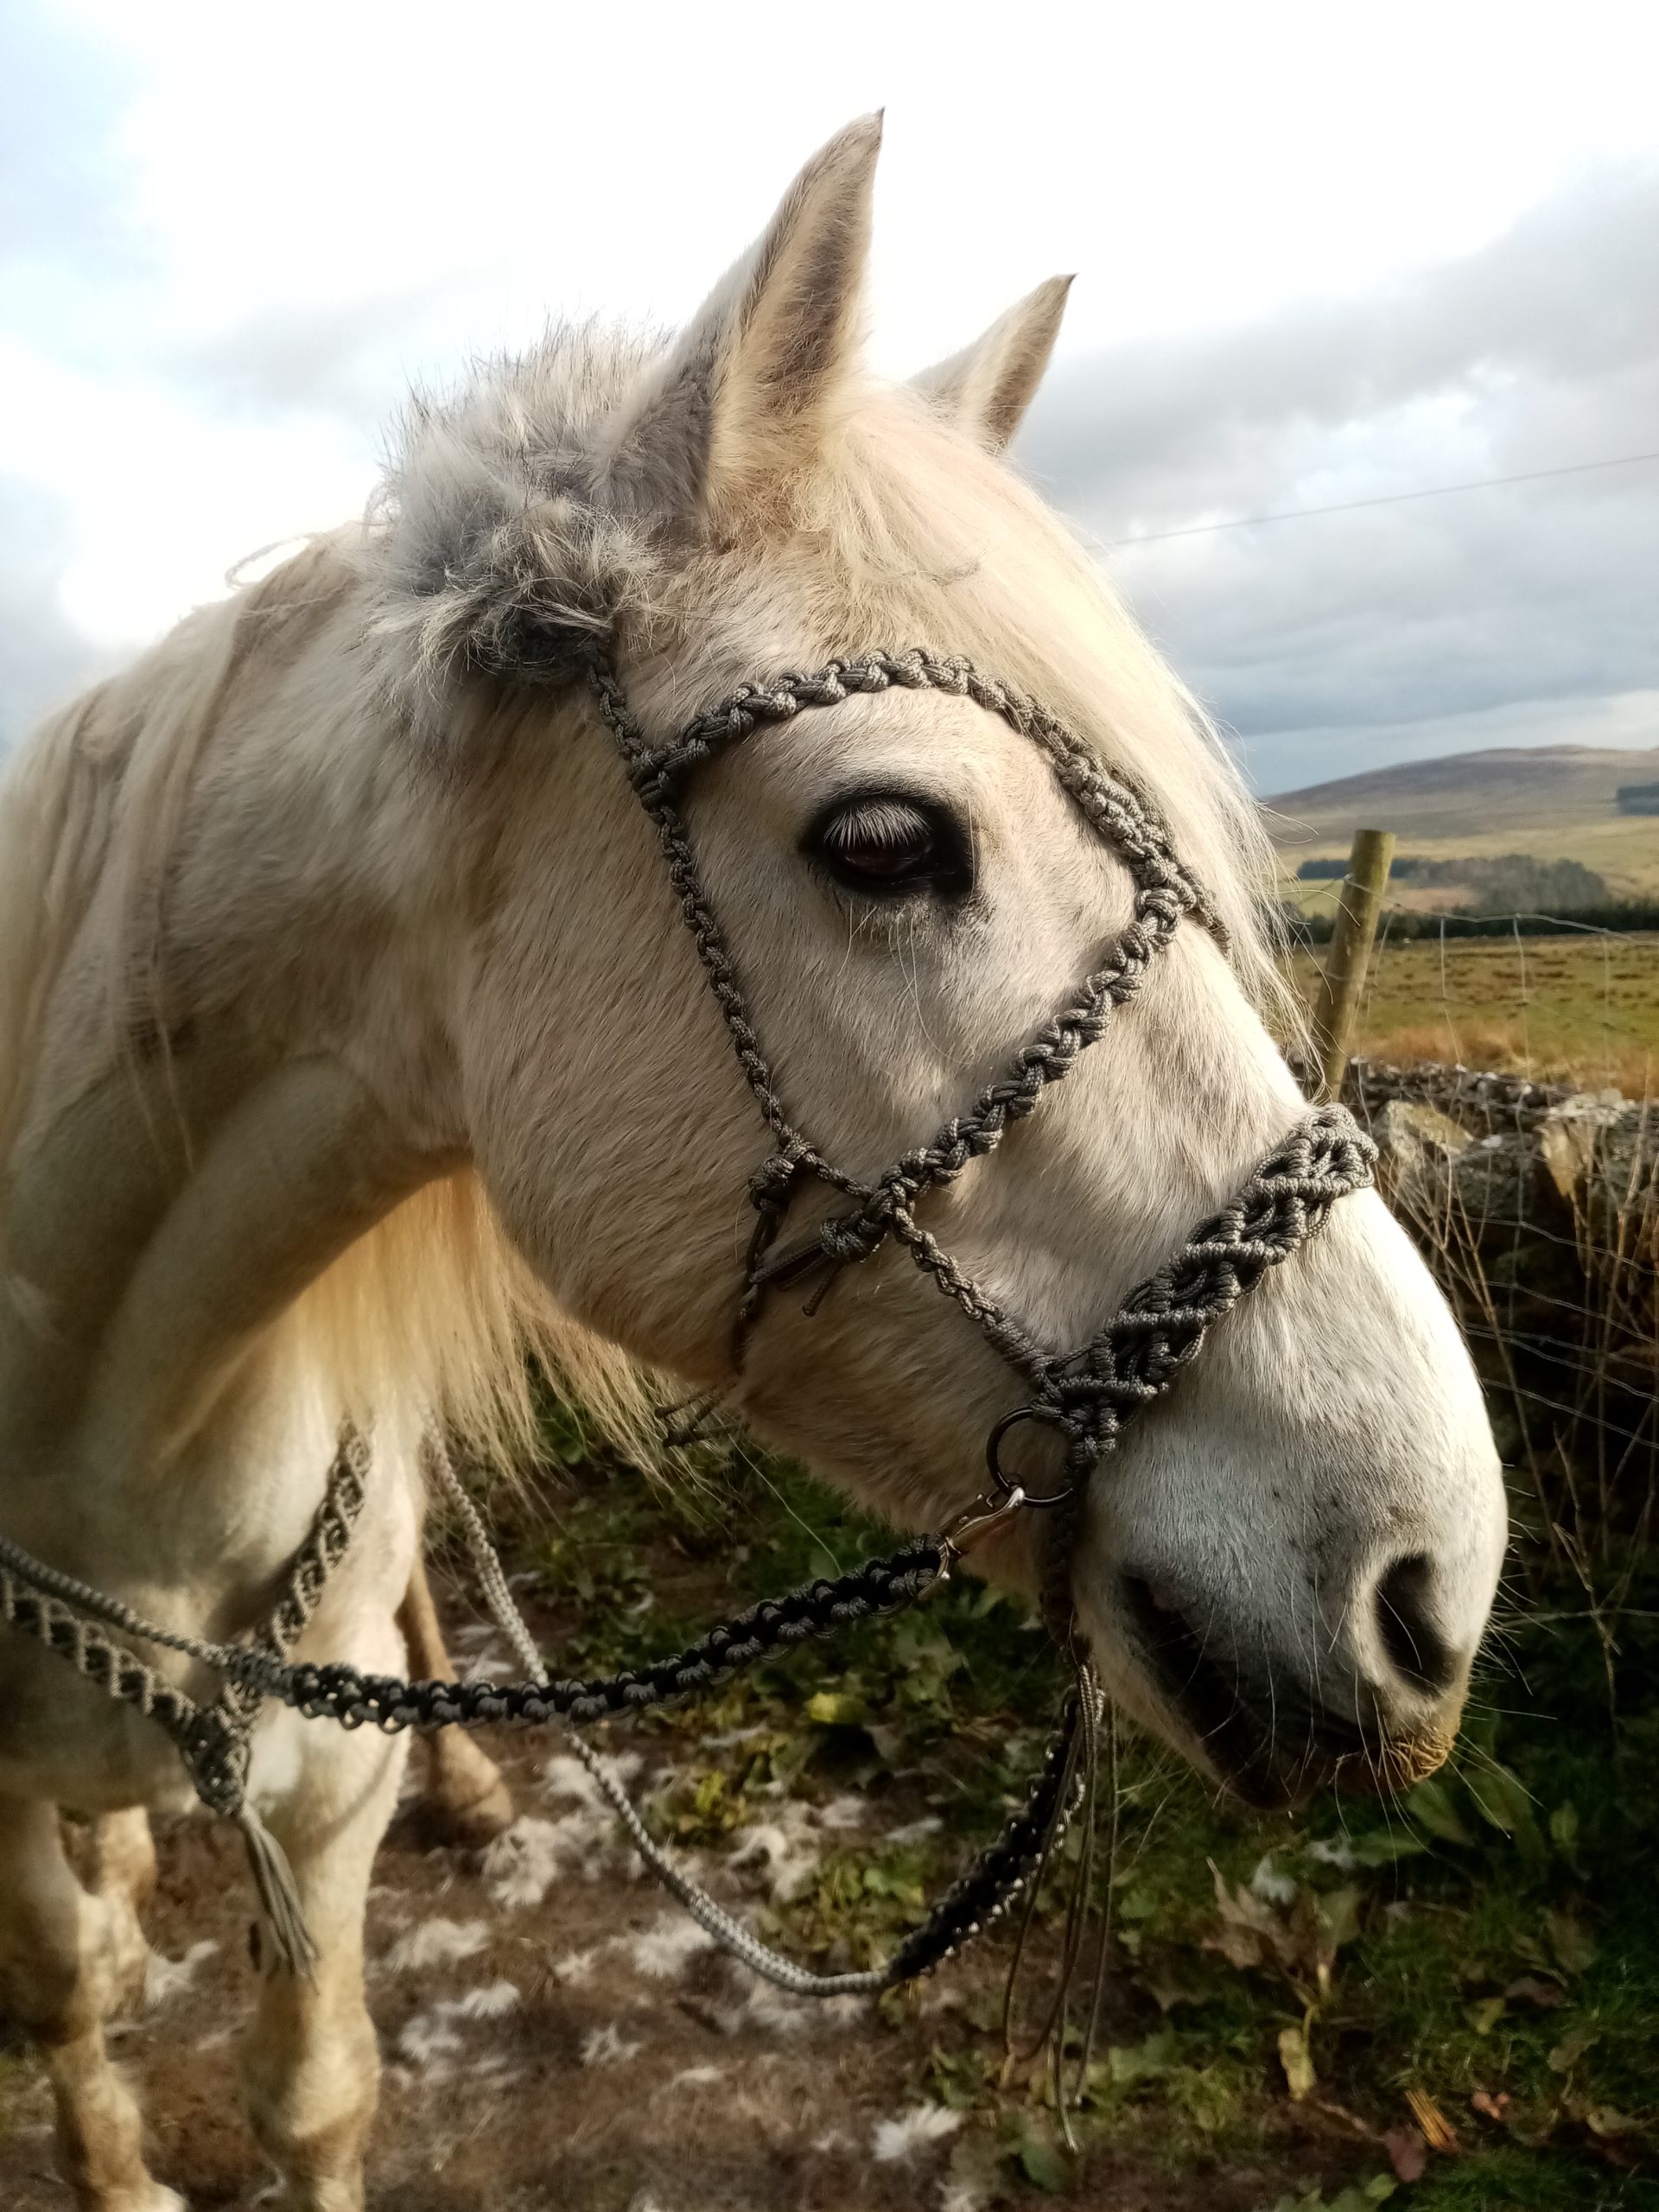 Bitless Bridle and Reins High Quality Custom Made UK 